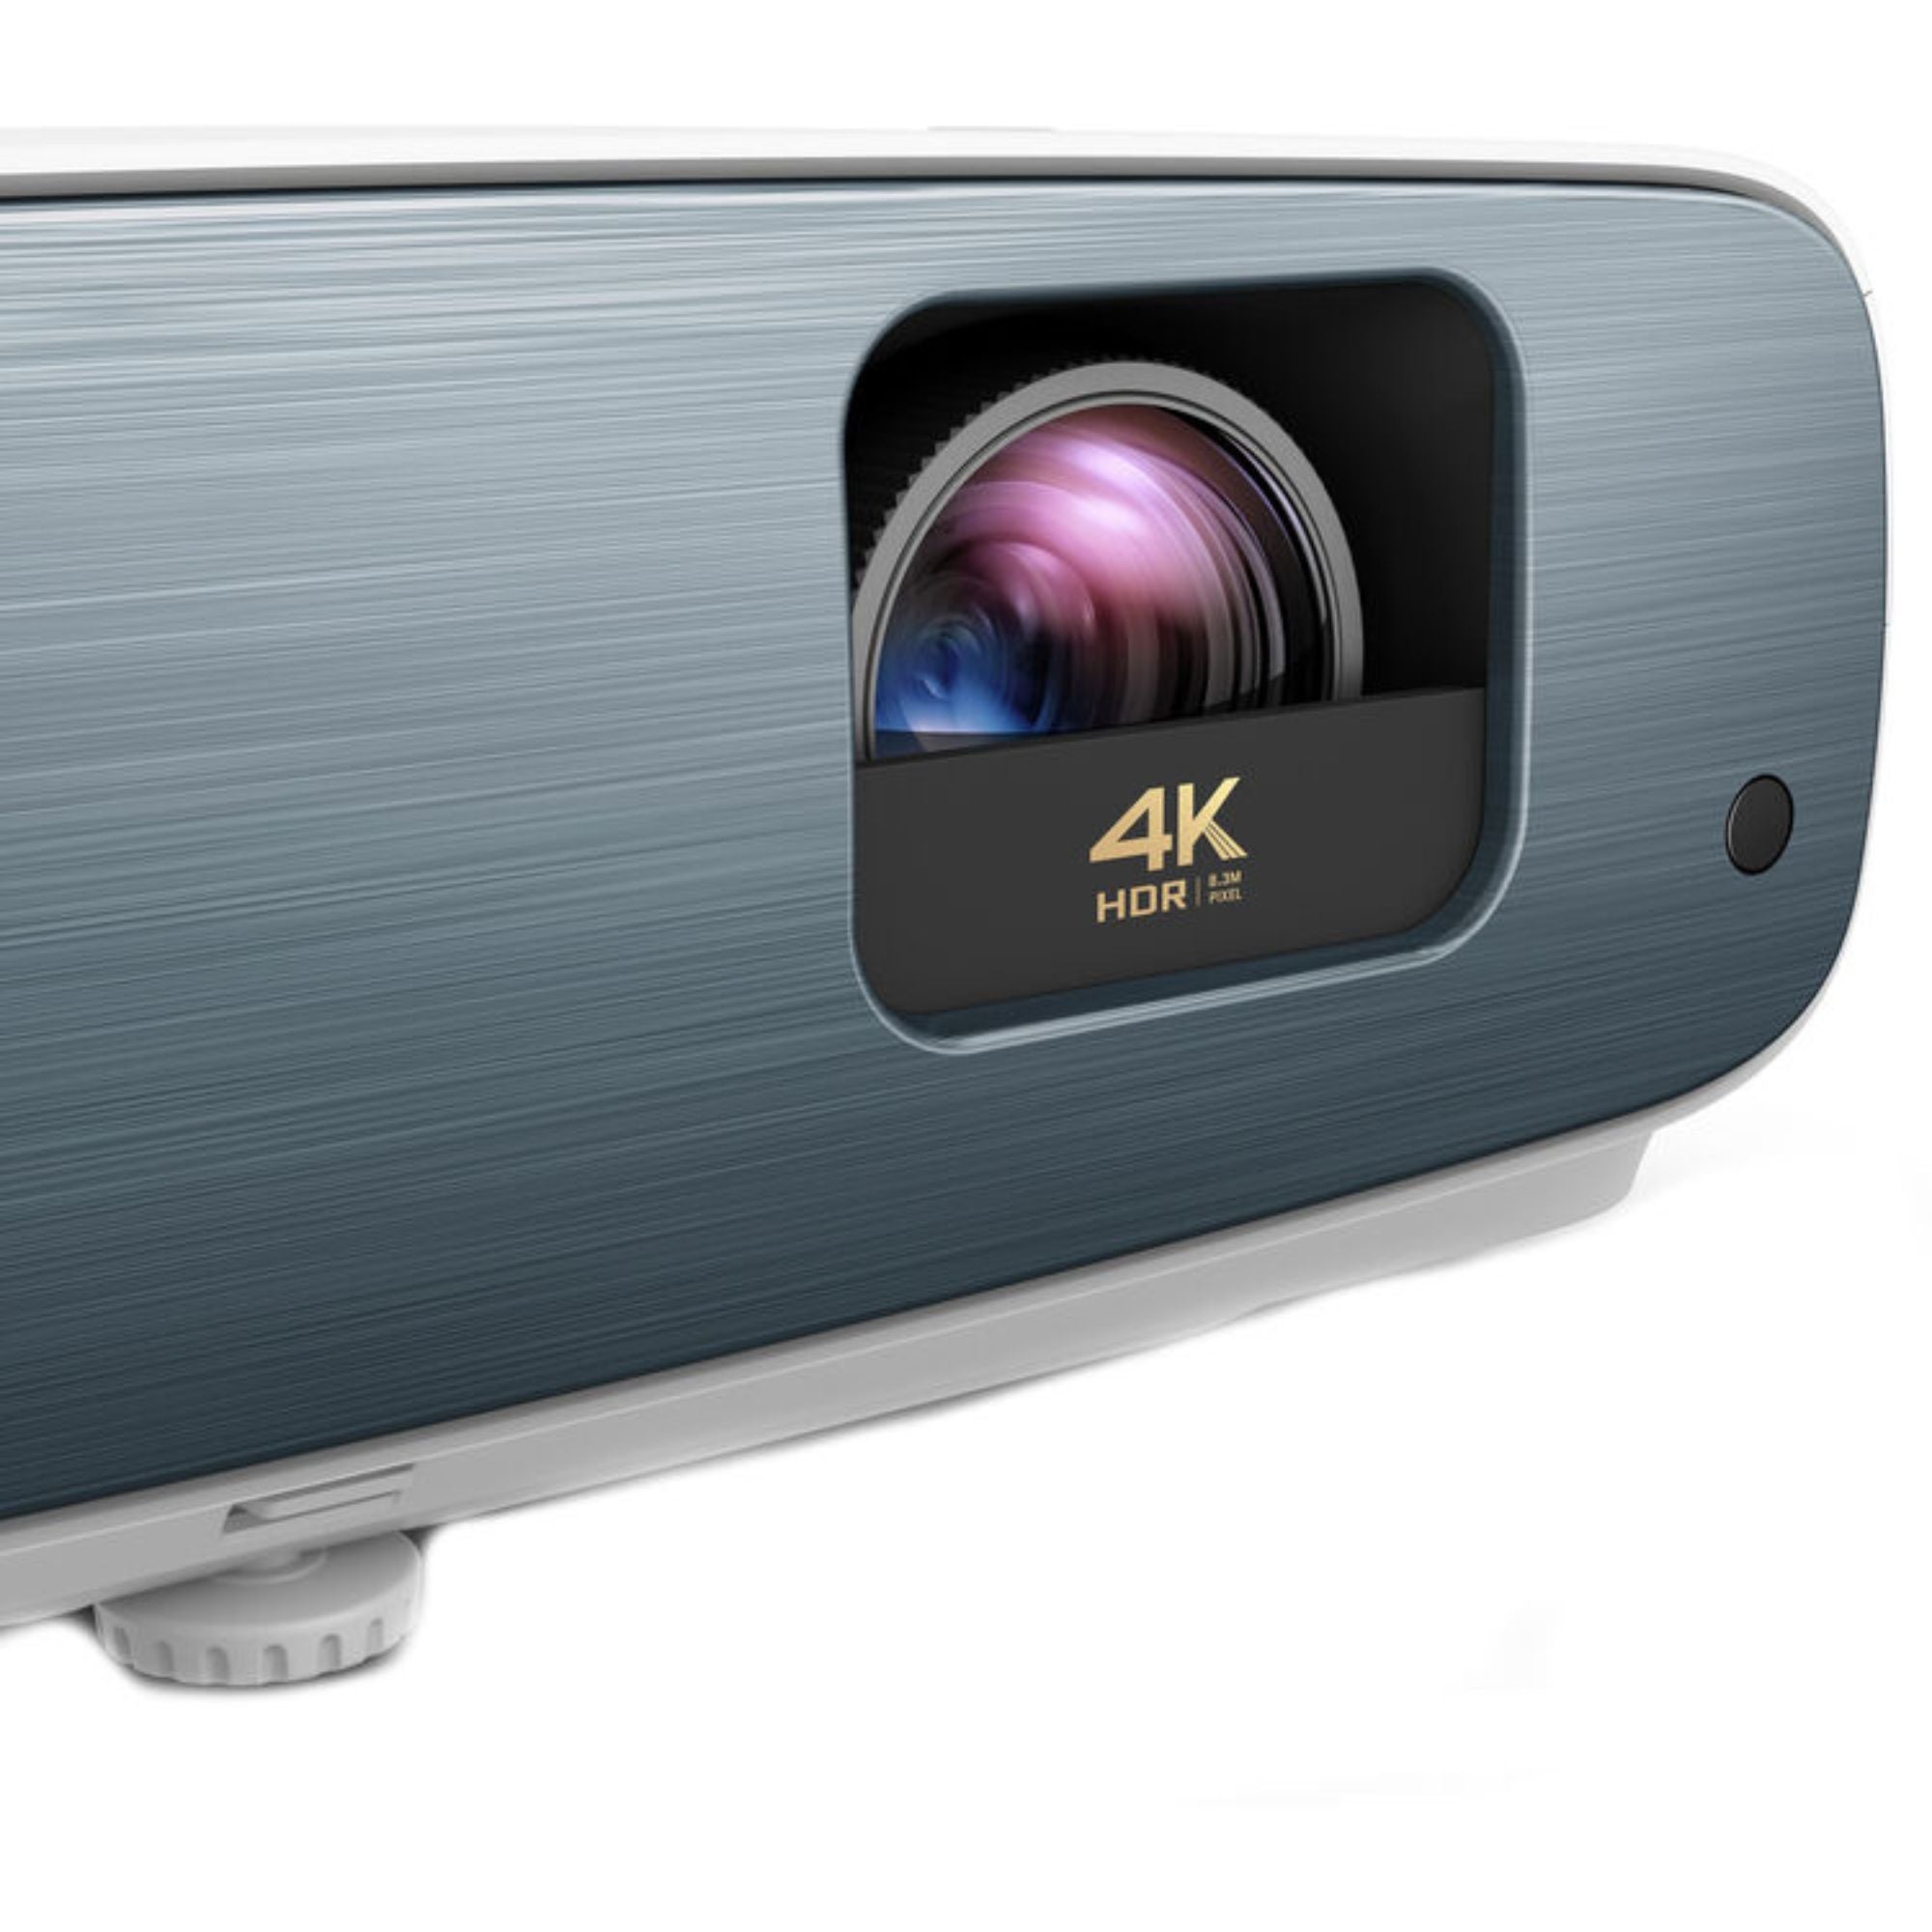 BenQ TK850i - HDR XPR 4K UHD Home Theater Projector with Android TV Wireless Adapter, BenQ, 4K HDR Projector - AVStore.in